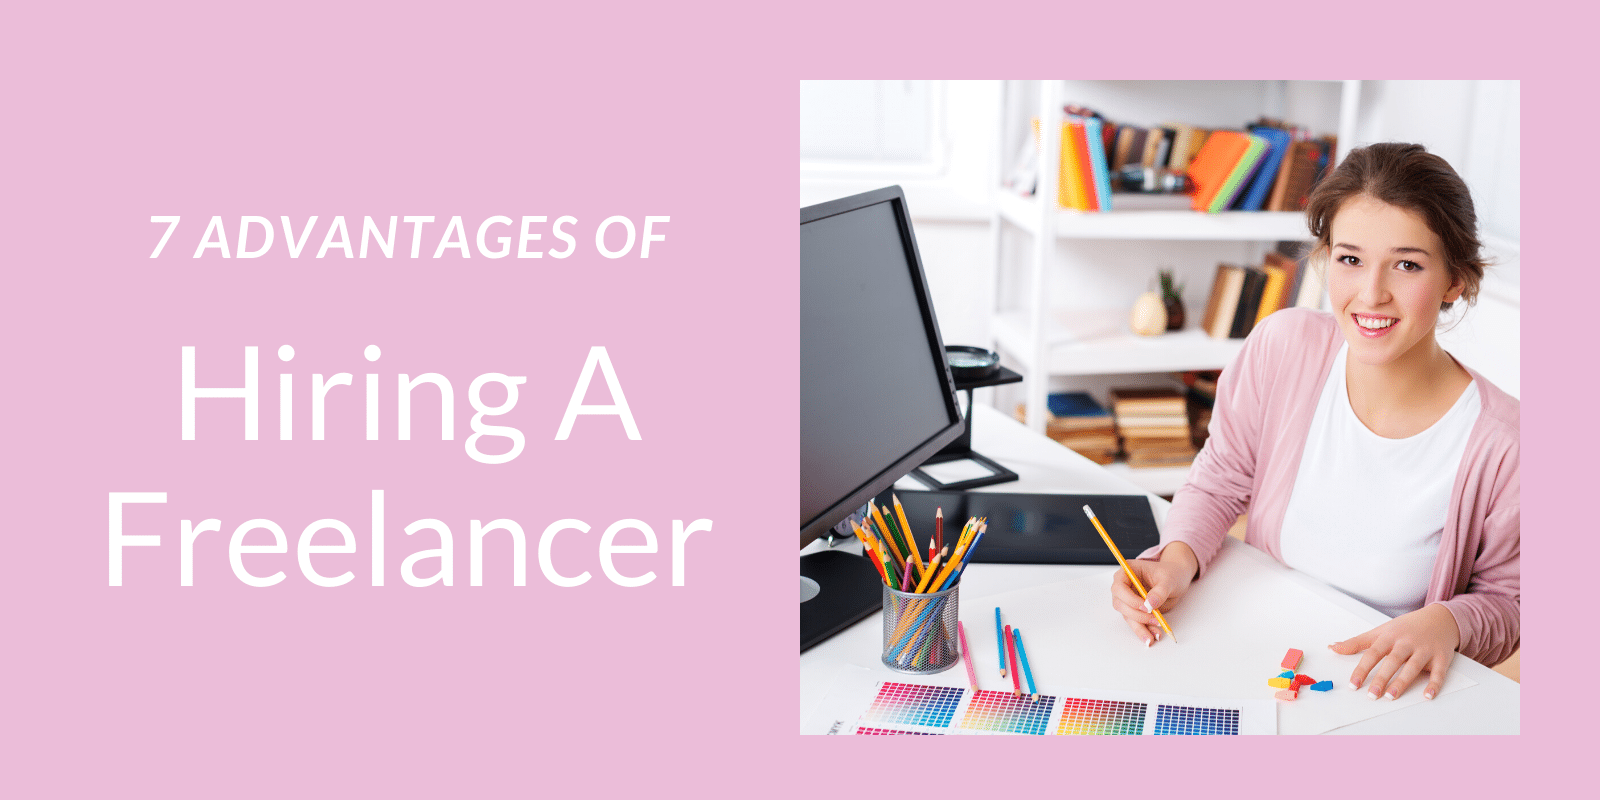 7 Advantages of Hiring Freelancers – The Thriving Small Business